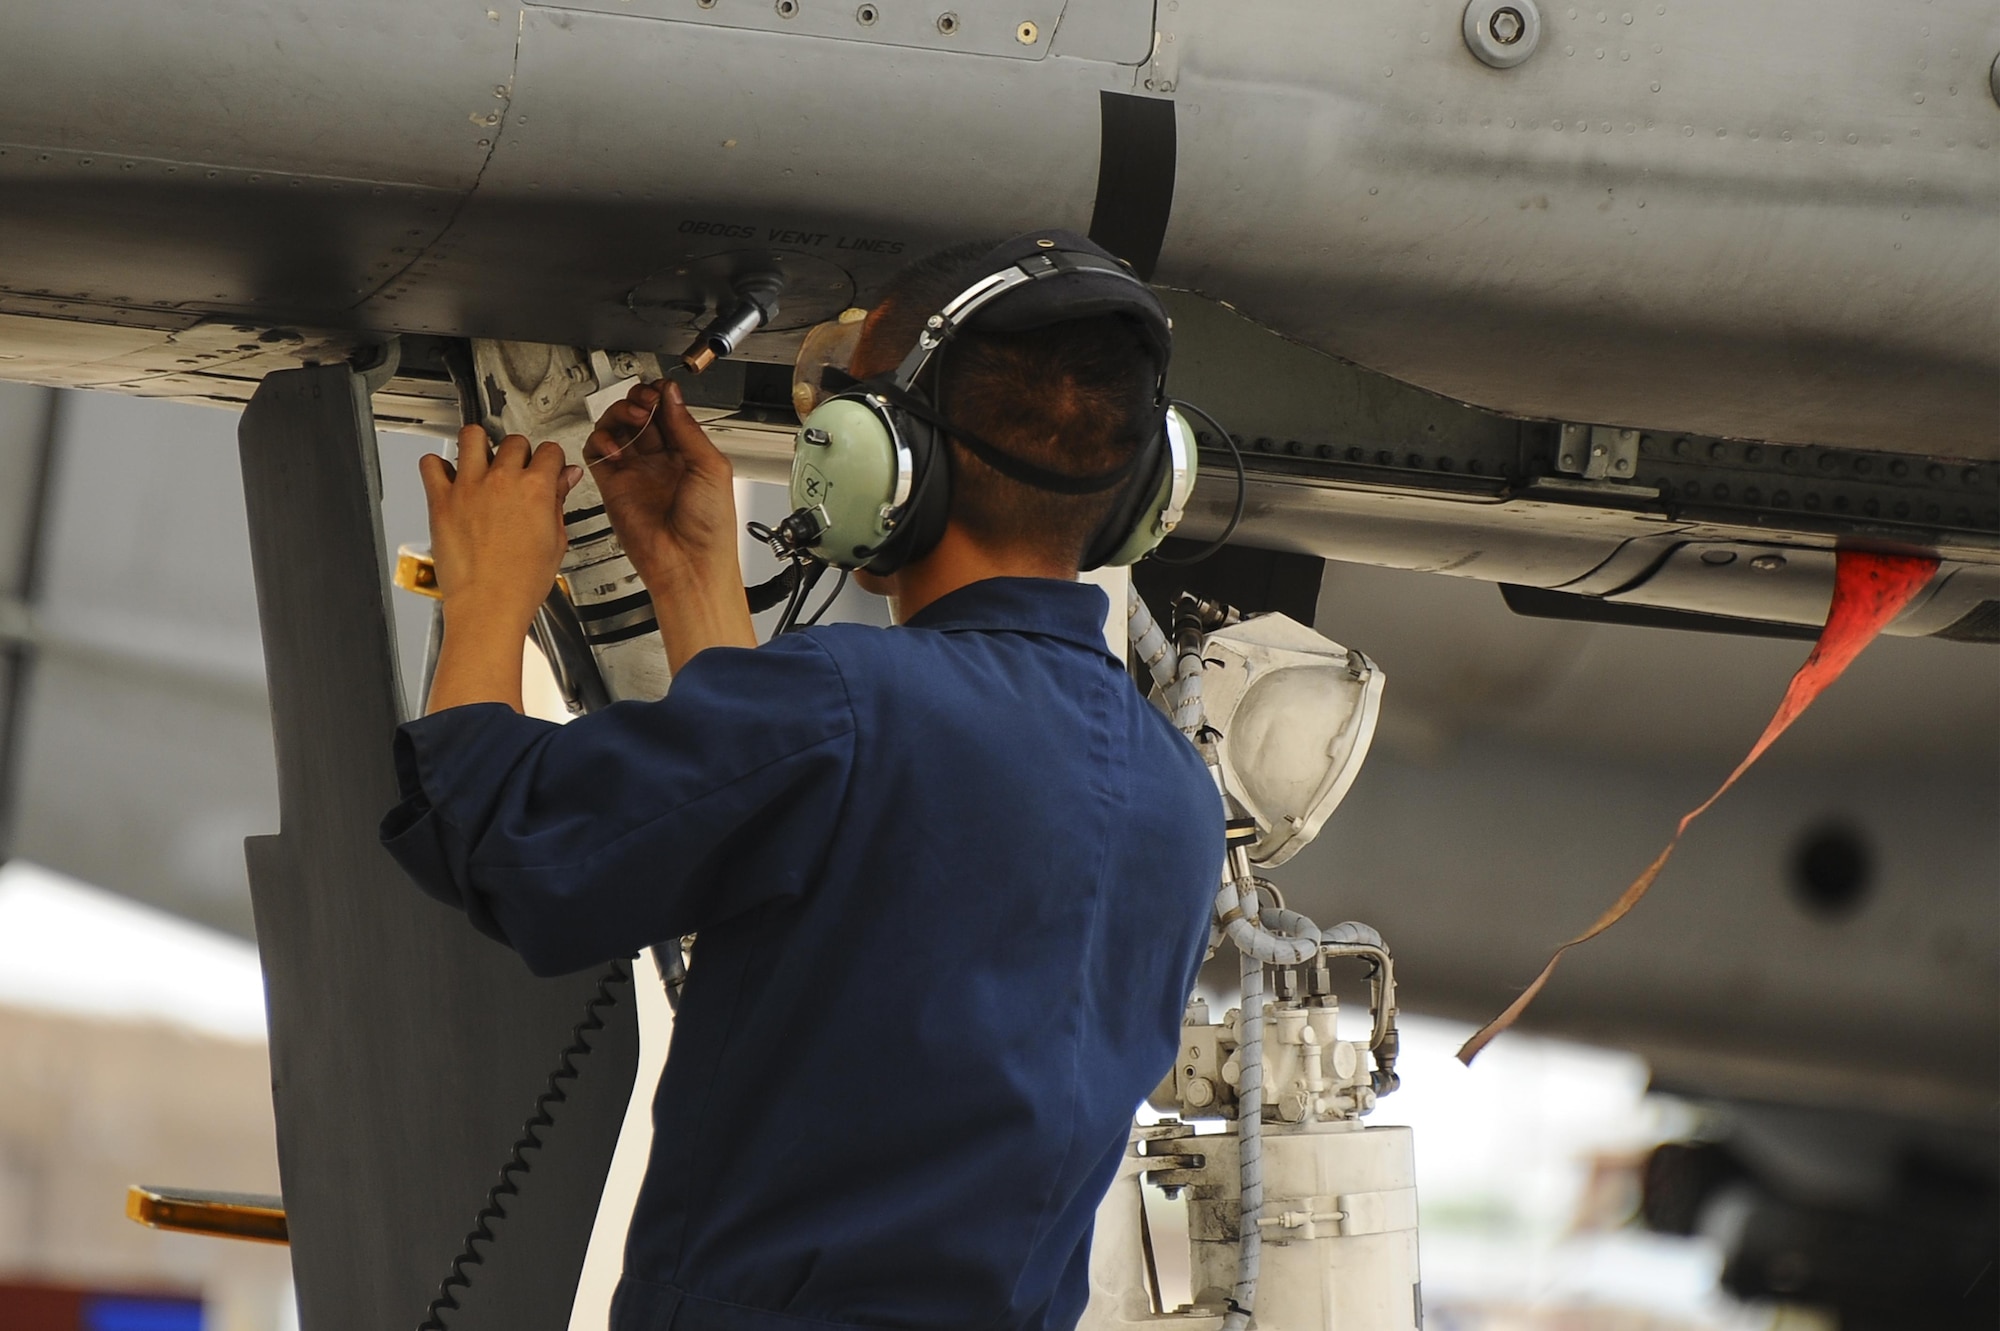 U.S. Air Force Senior Airman Andy Bui, 355th Aircraft Maintenance Squadron A-10C Thunderbolt II crew chief, performs an operational check on the flightline at Davis-Monthan Air Force Base, Ariz., June 23, 2016. The checklists are designed to ensure the safety of the aircraft and the pilot before takeoff. (U.S. Air Force photo by Airman 1st Class Mya M. Crosby/Released)